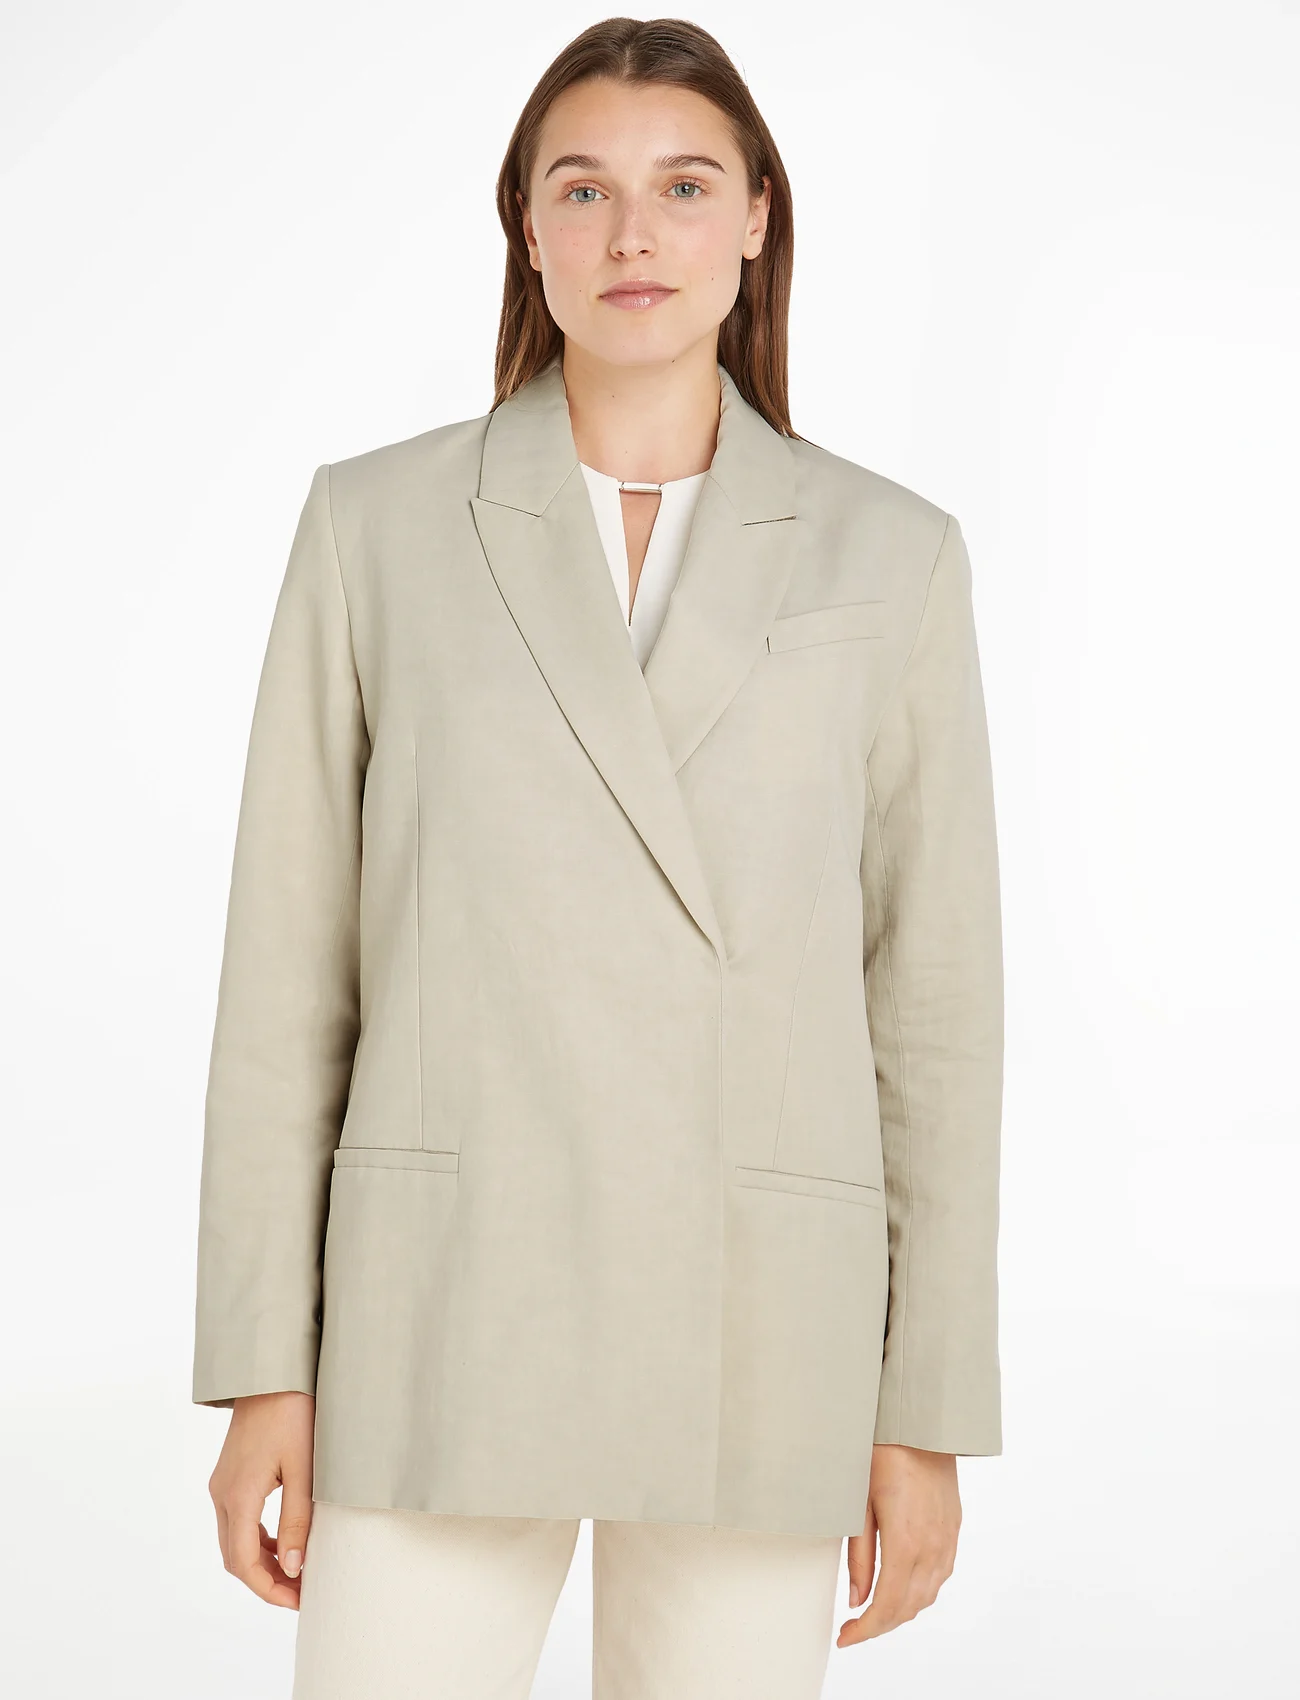 Calvin Klein - LINEN TAILORED RELAXED BLAZER - party wear at outlet prices - peyote - 1